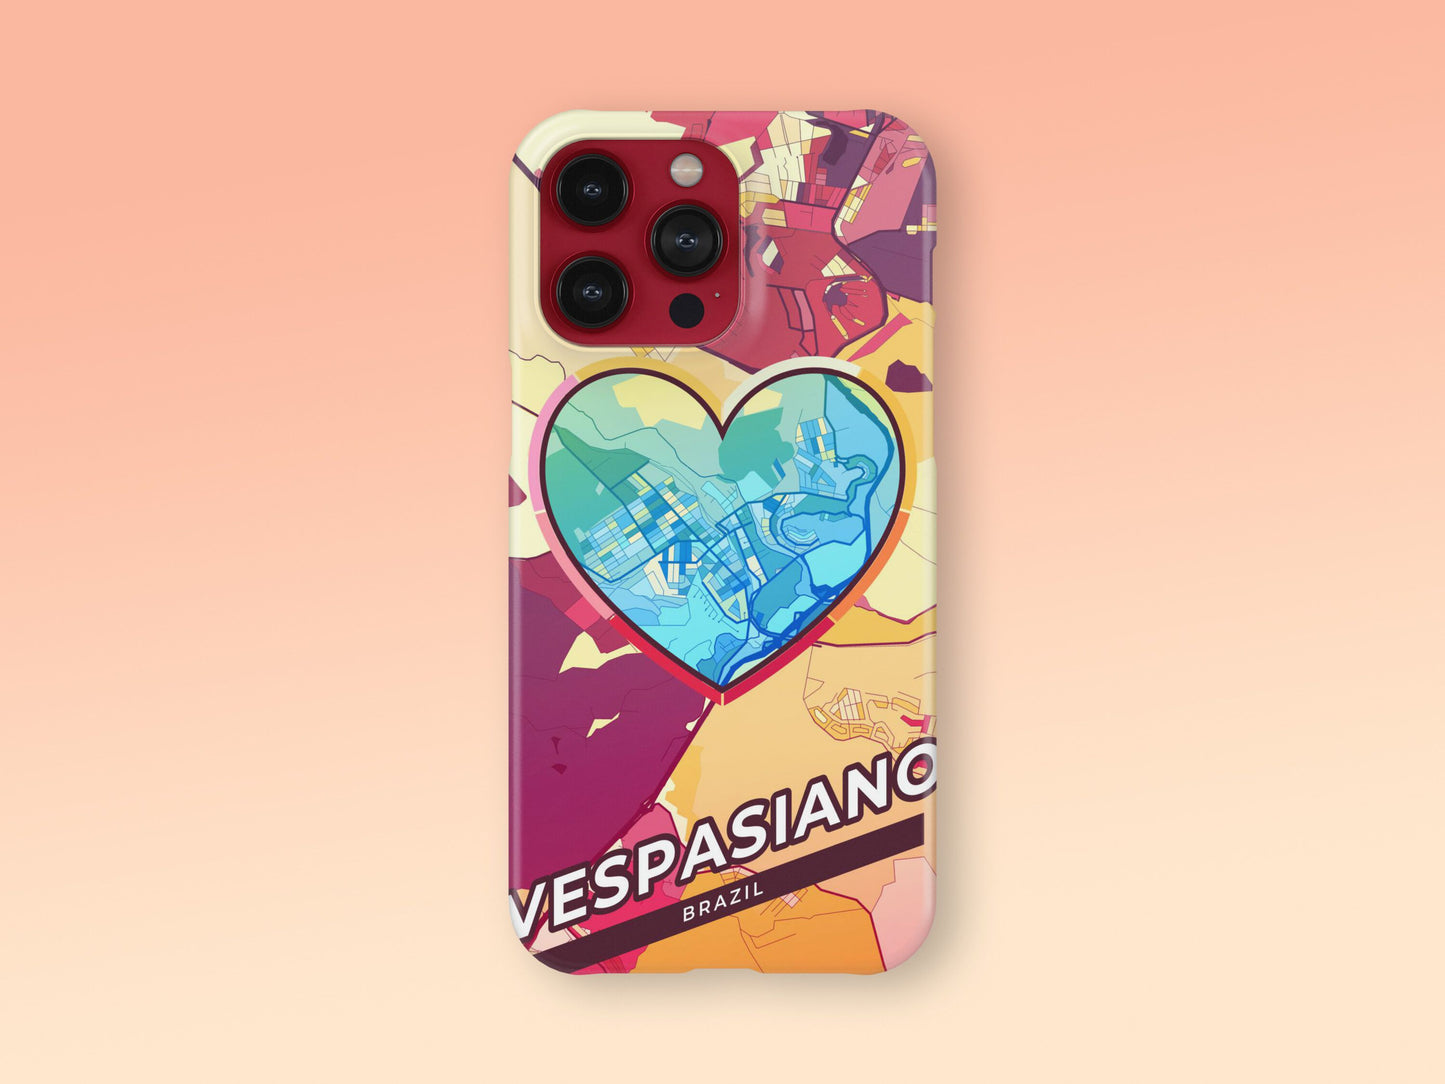 Vespasiano Brazil slim phone case with colorful icon. Birthday, wedding or housewarming gift. Couple match cases. 2